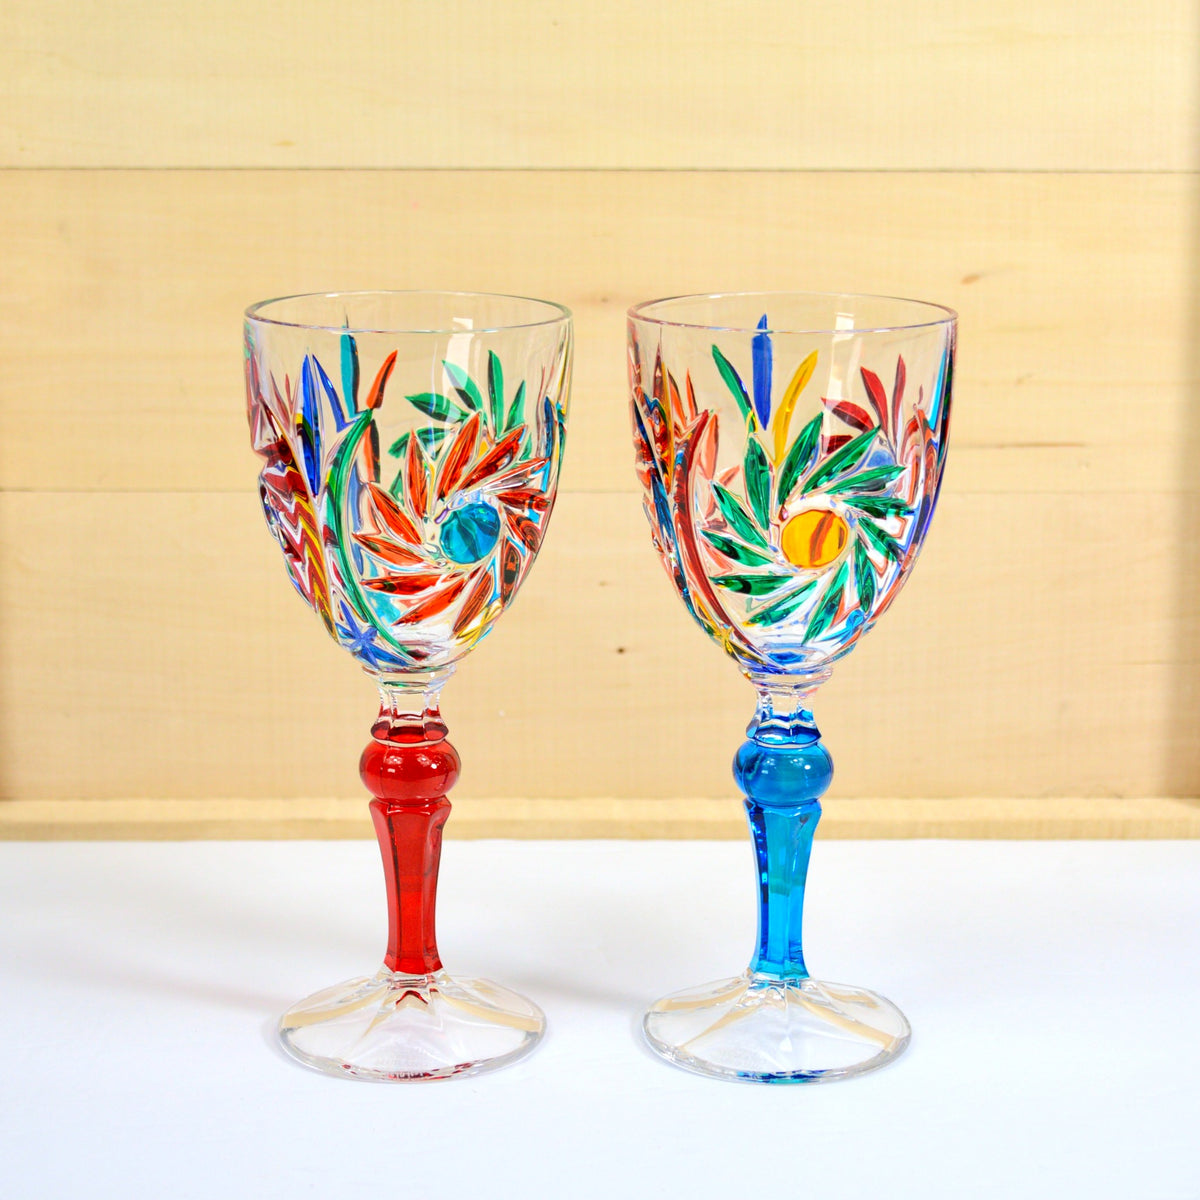 Twizzler Wine Glasses, Set of 2, Made in Italy - My Italian Decor